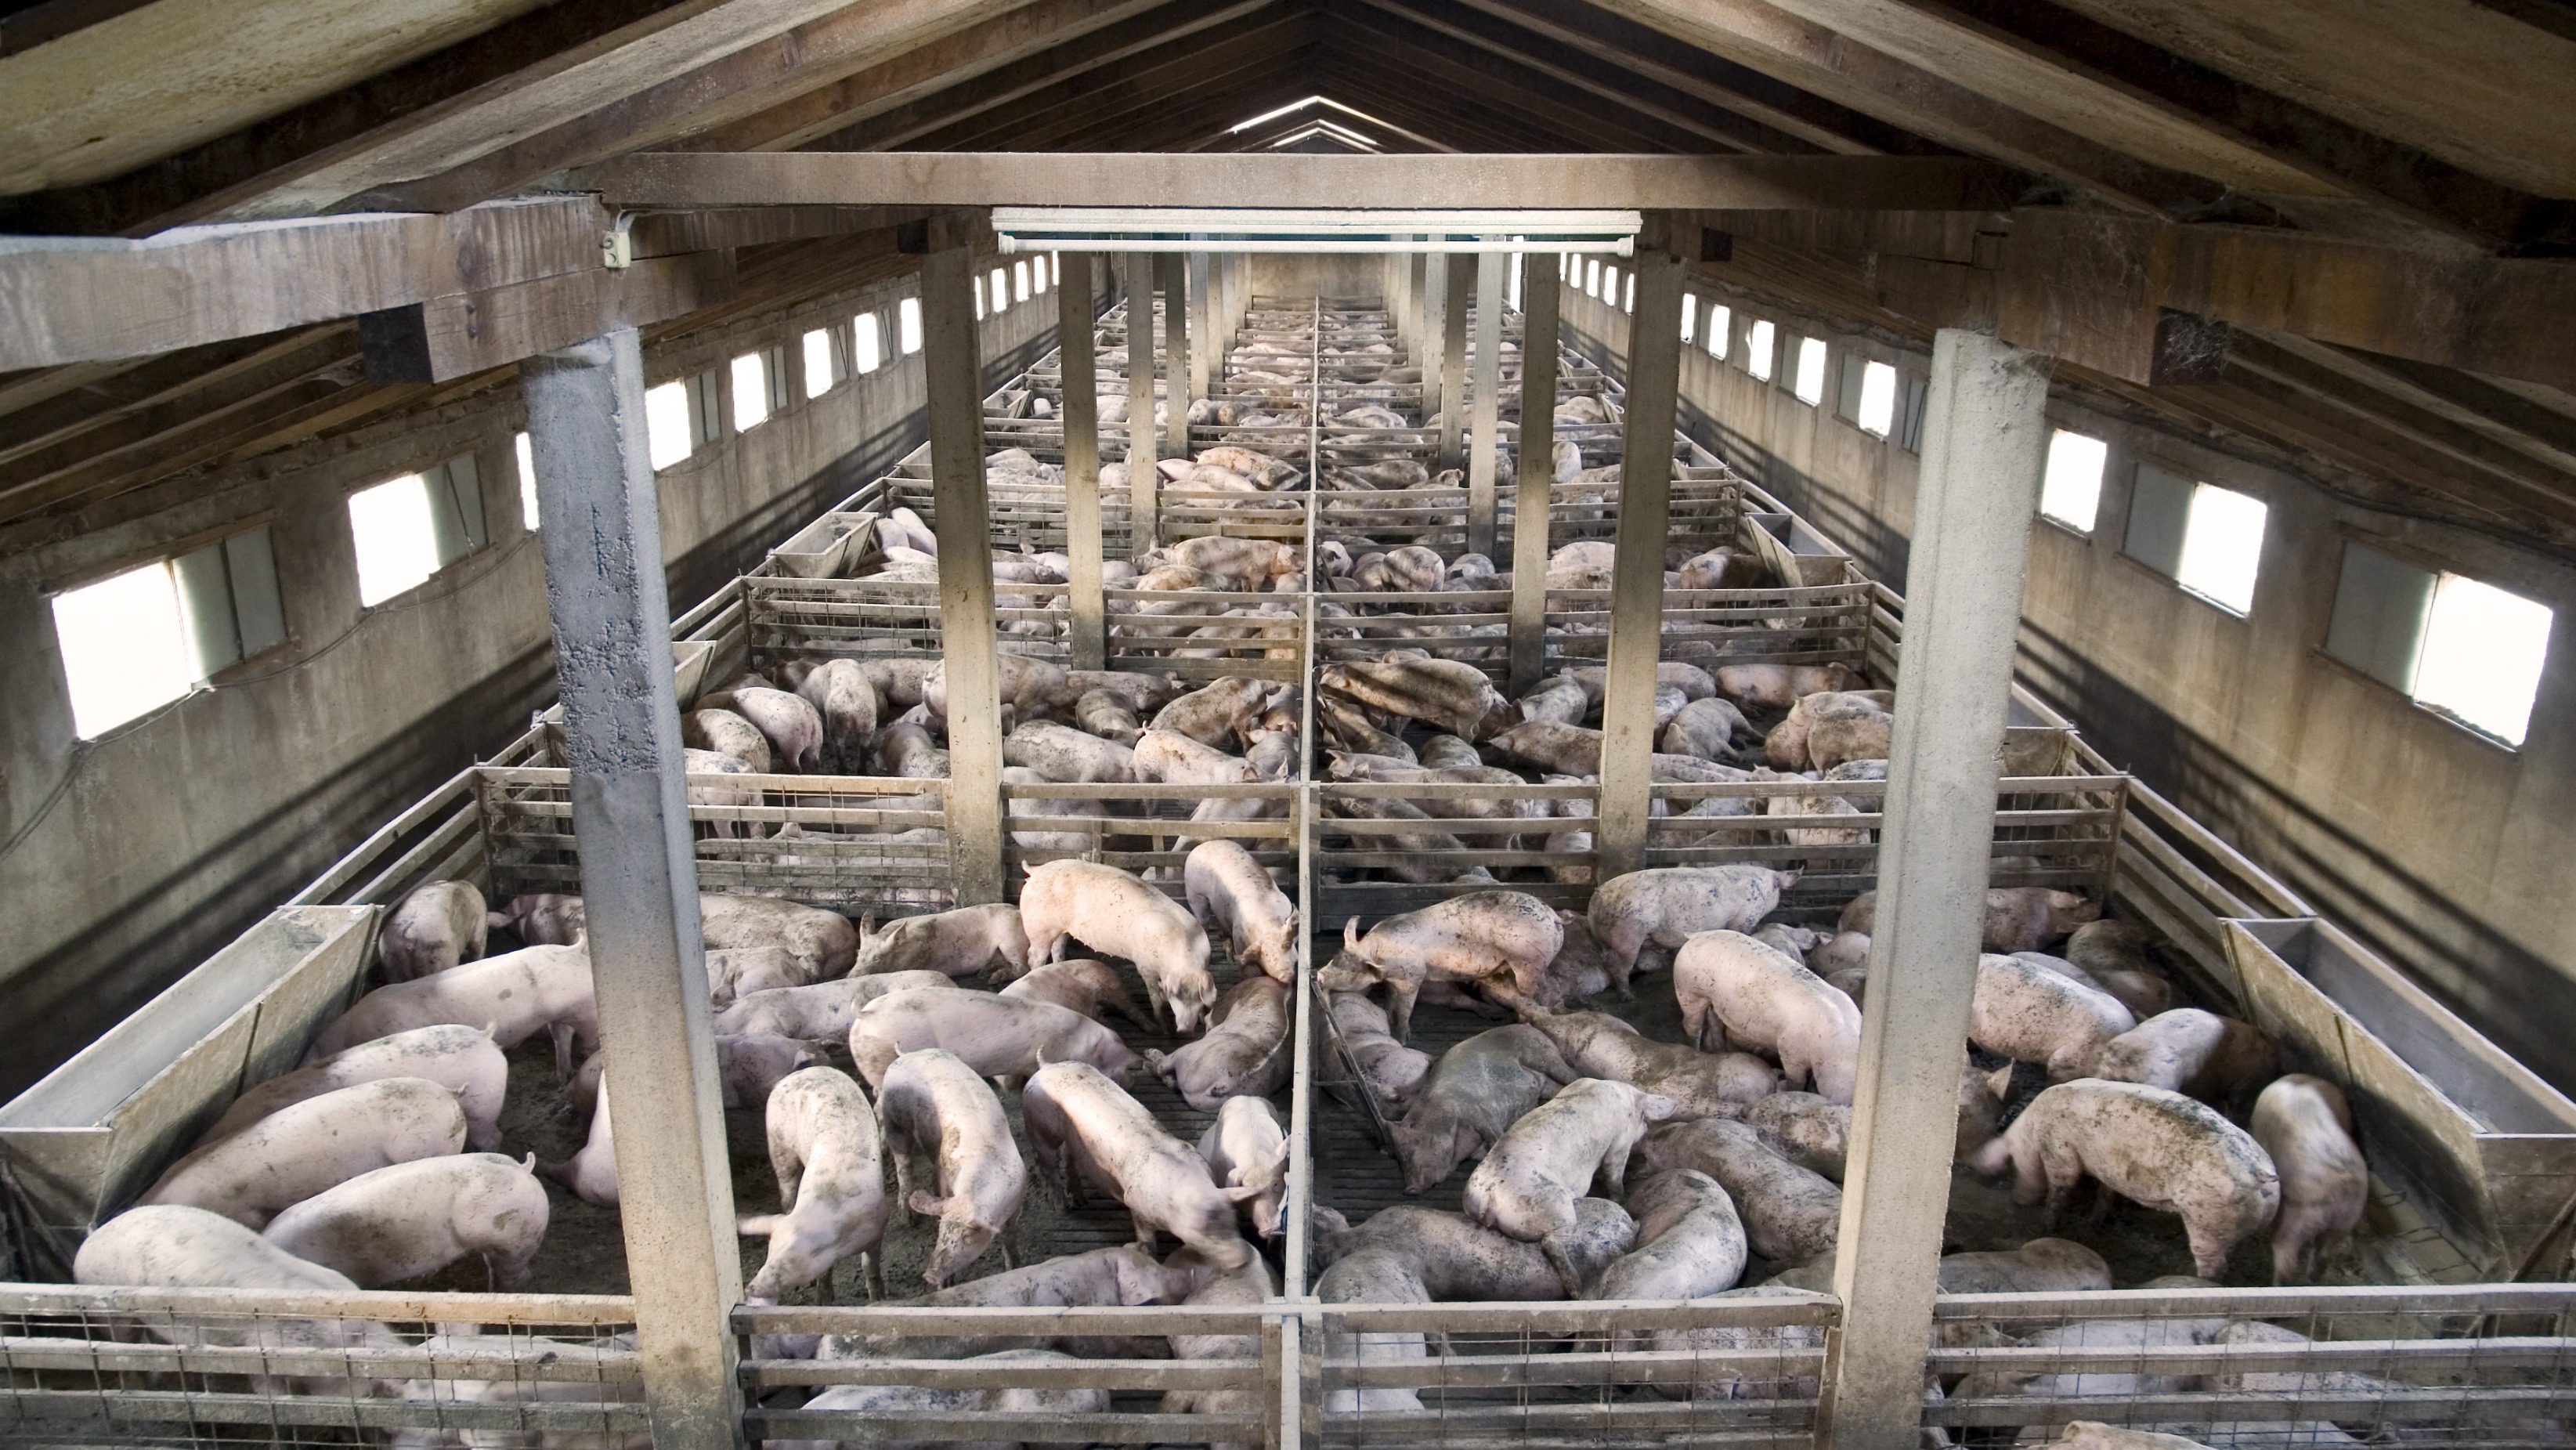 Giant hog farms are making people sick. Here's why it's a civil